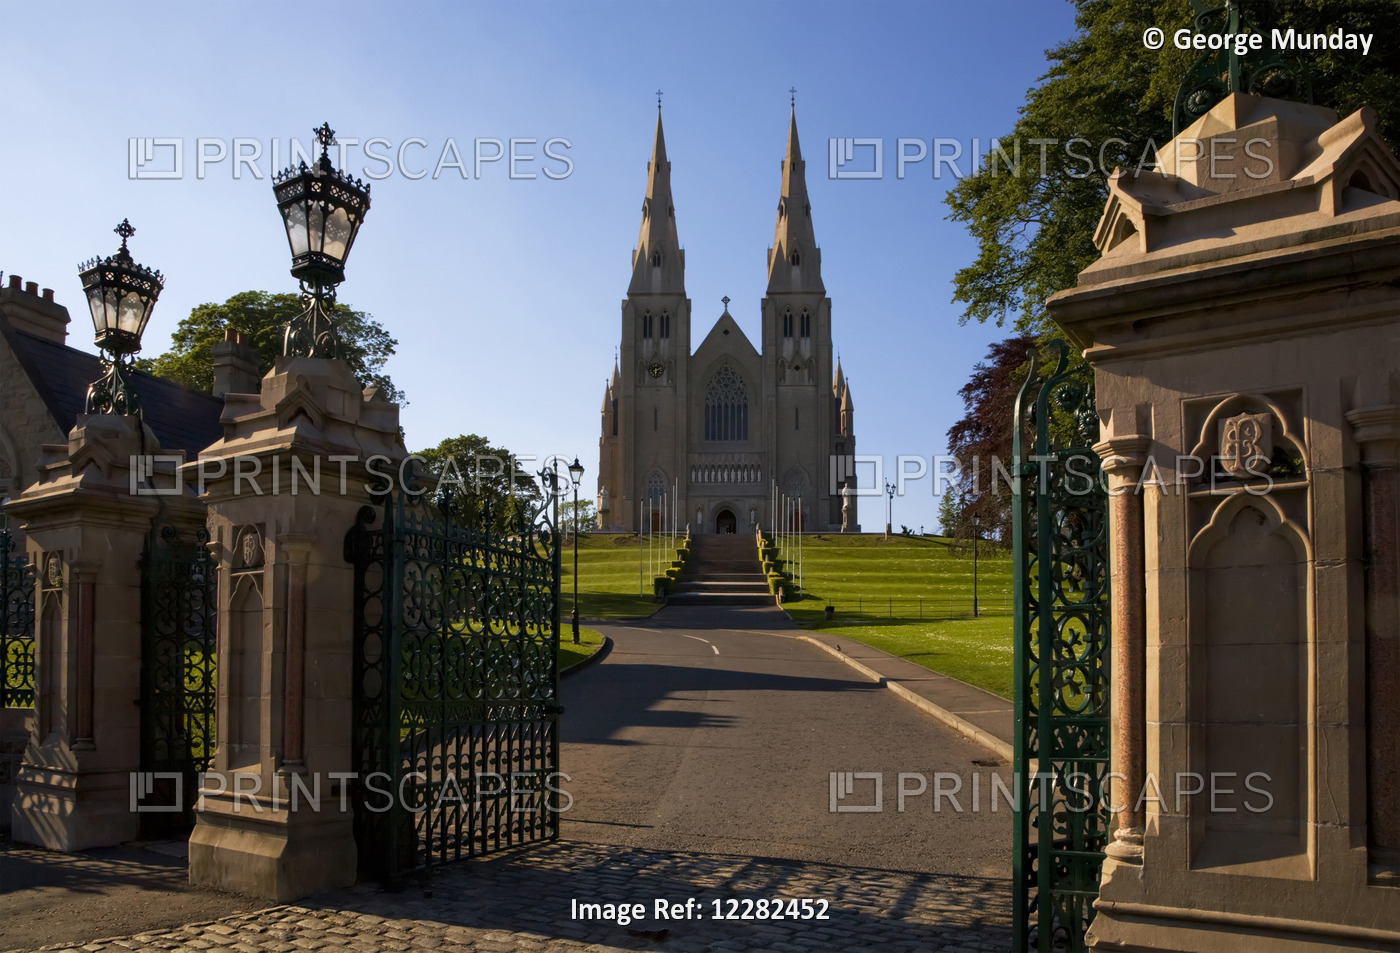 St Patrick's (Rc) Cathedral, Armagh, County Armagh, Ireland